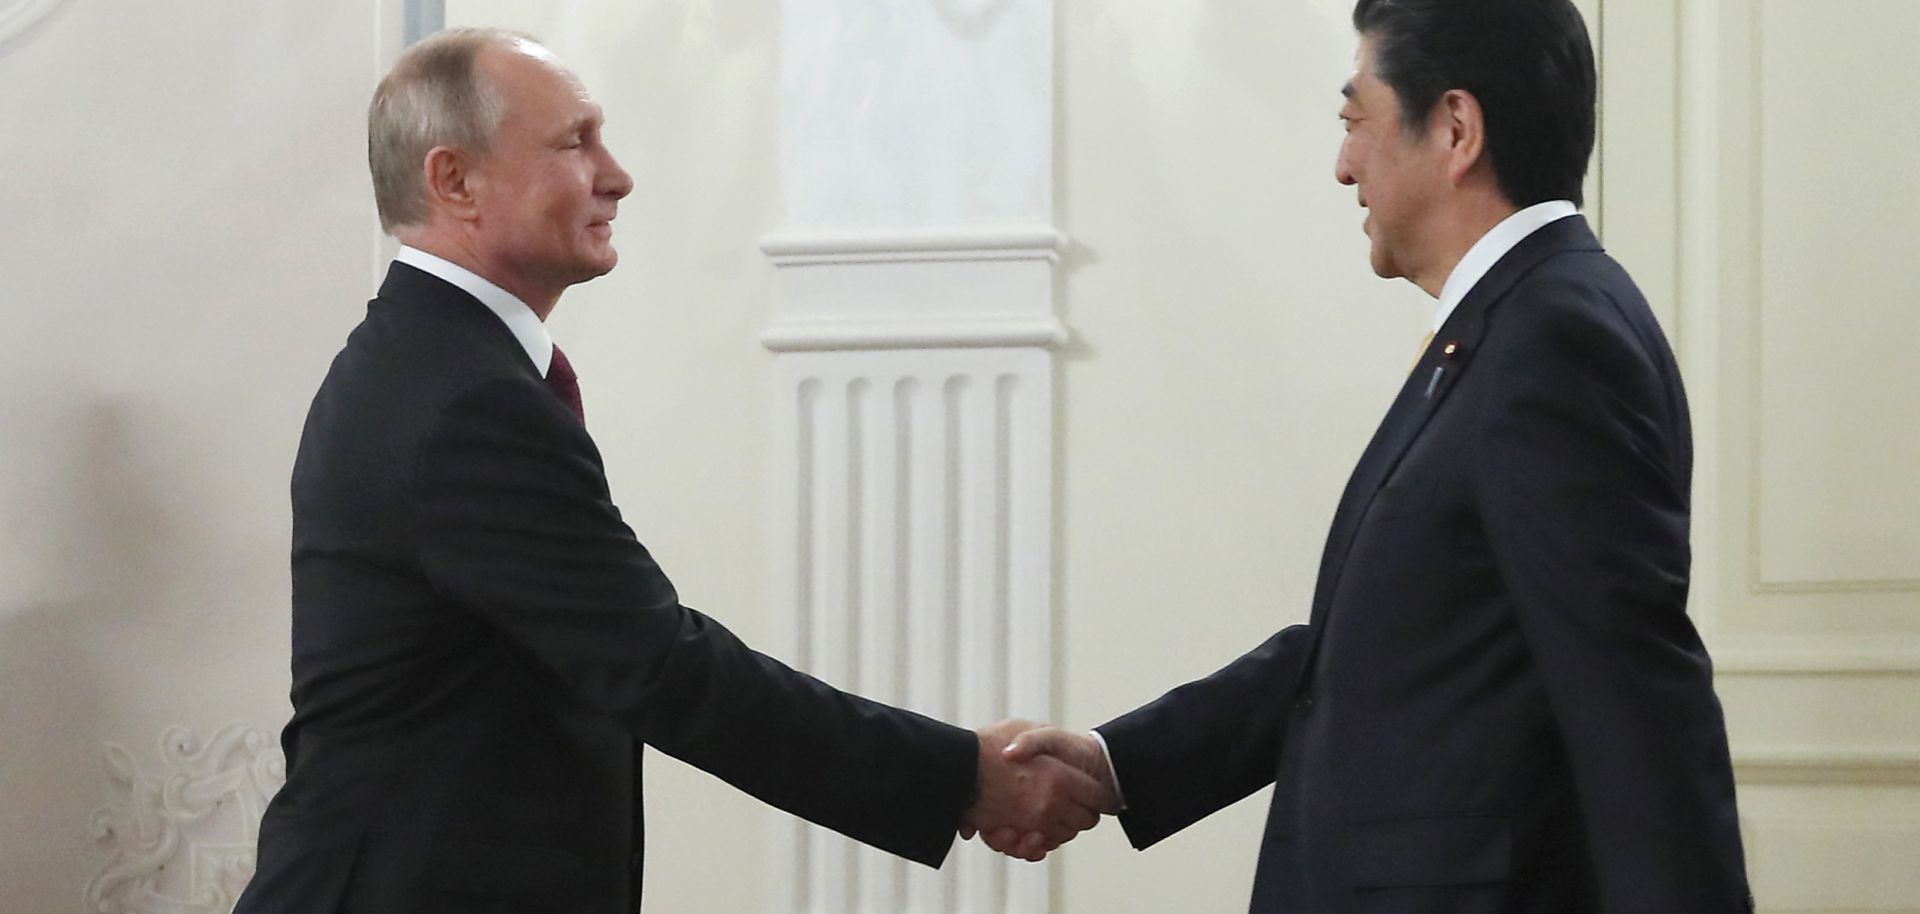 The meeting Jan. 22 between Russian President Vladimir Putin and Japanese Prime Minister Shinzo Abe will mark their 25th since Abe assumed power in 2012.